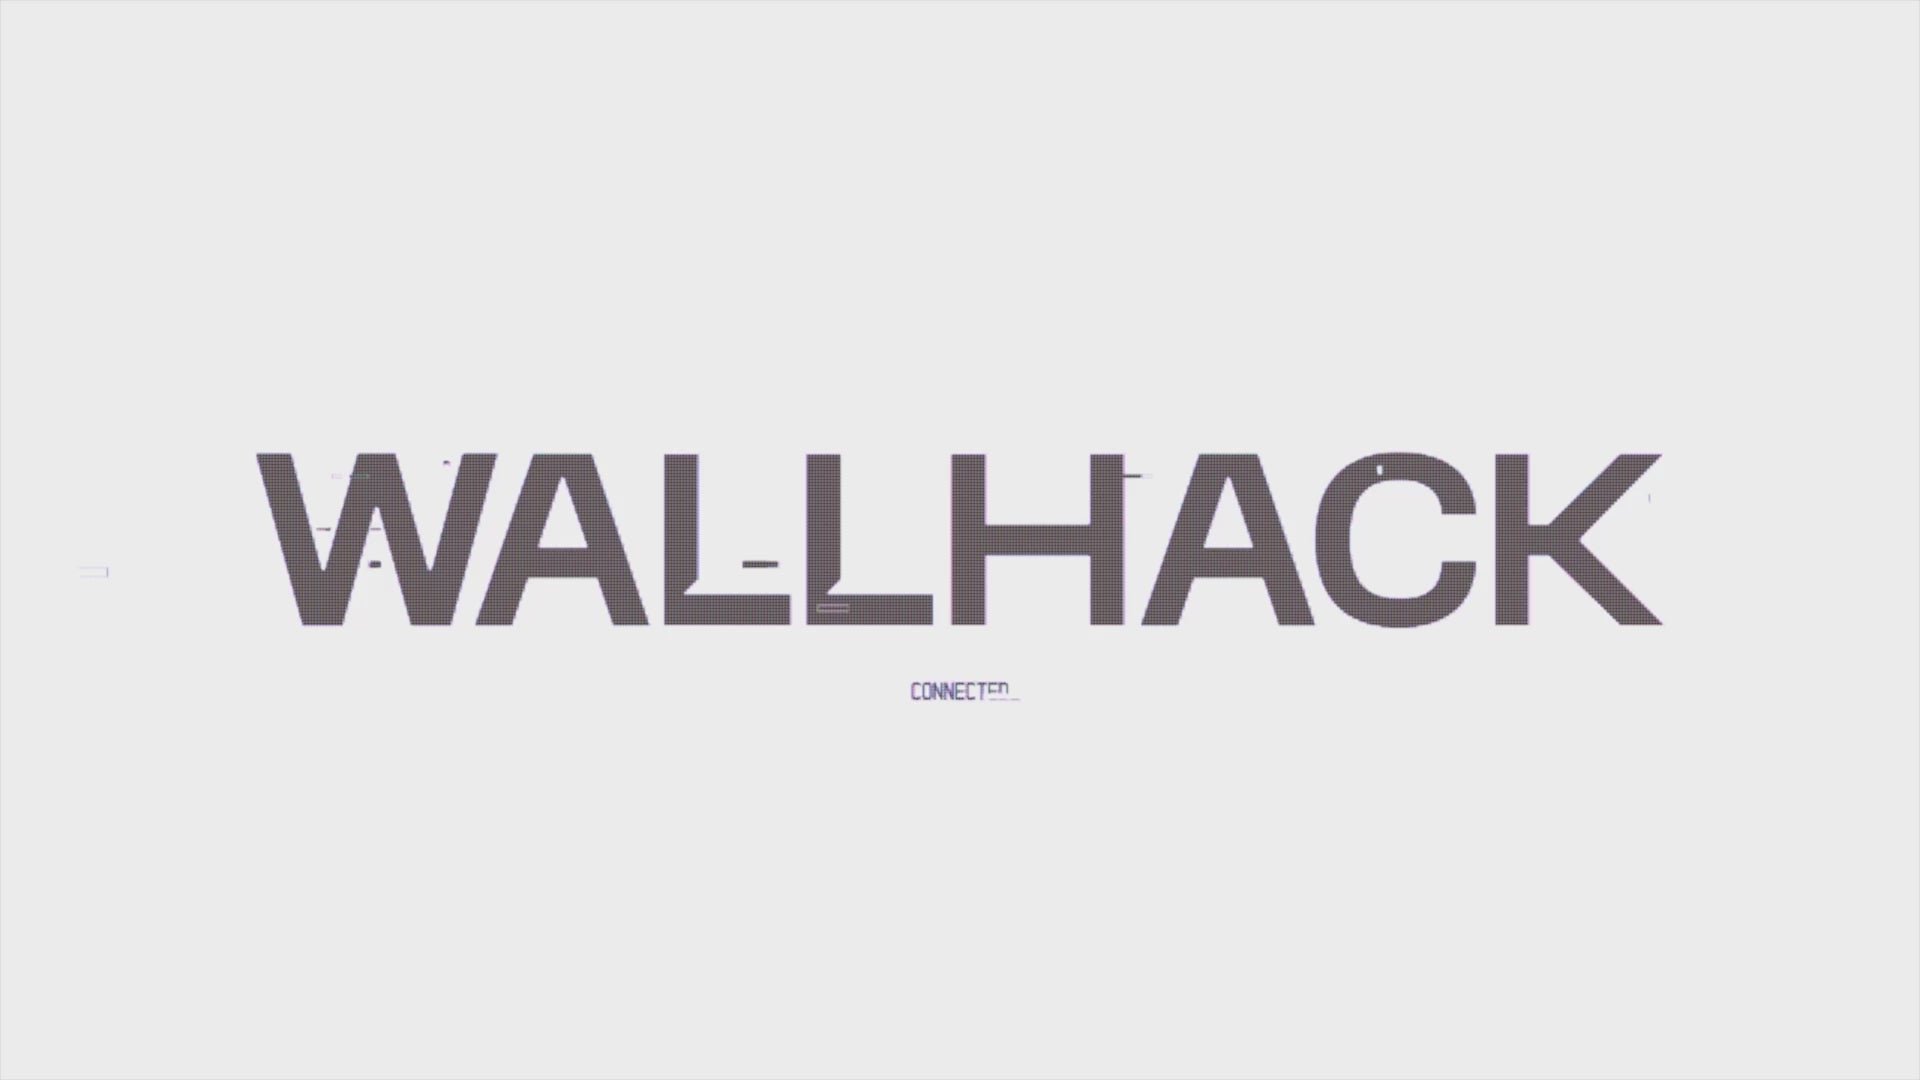 Wallhack gaming peripherals product launch showing testing and engineering